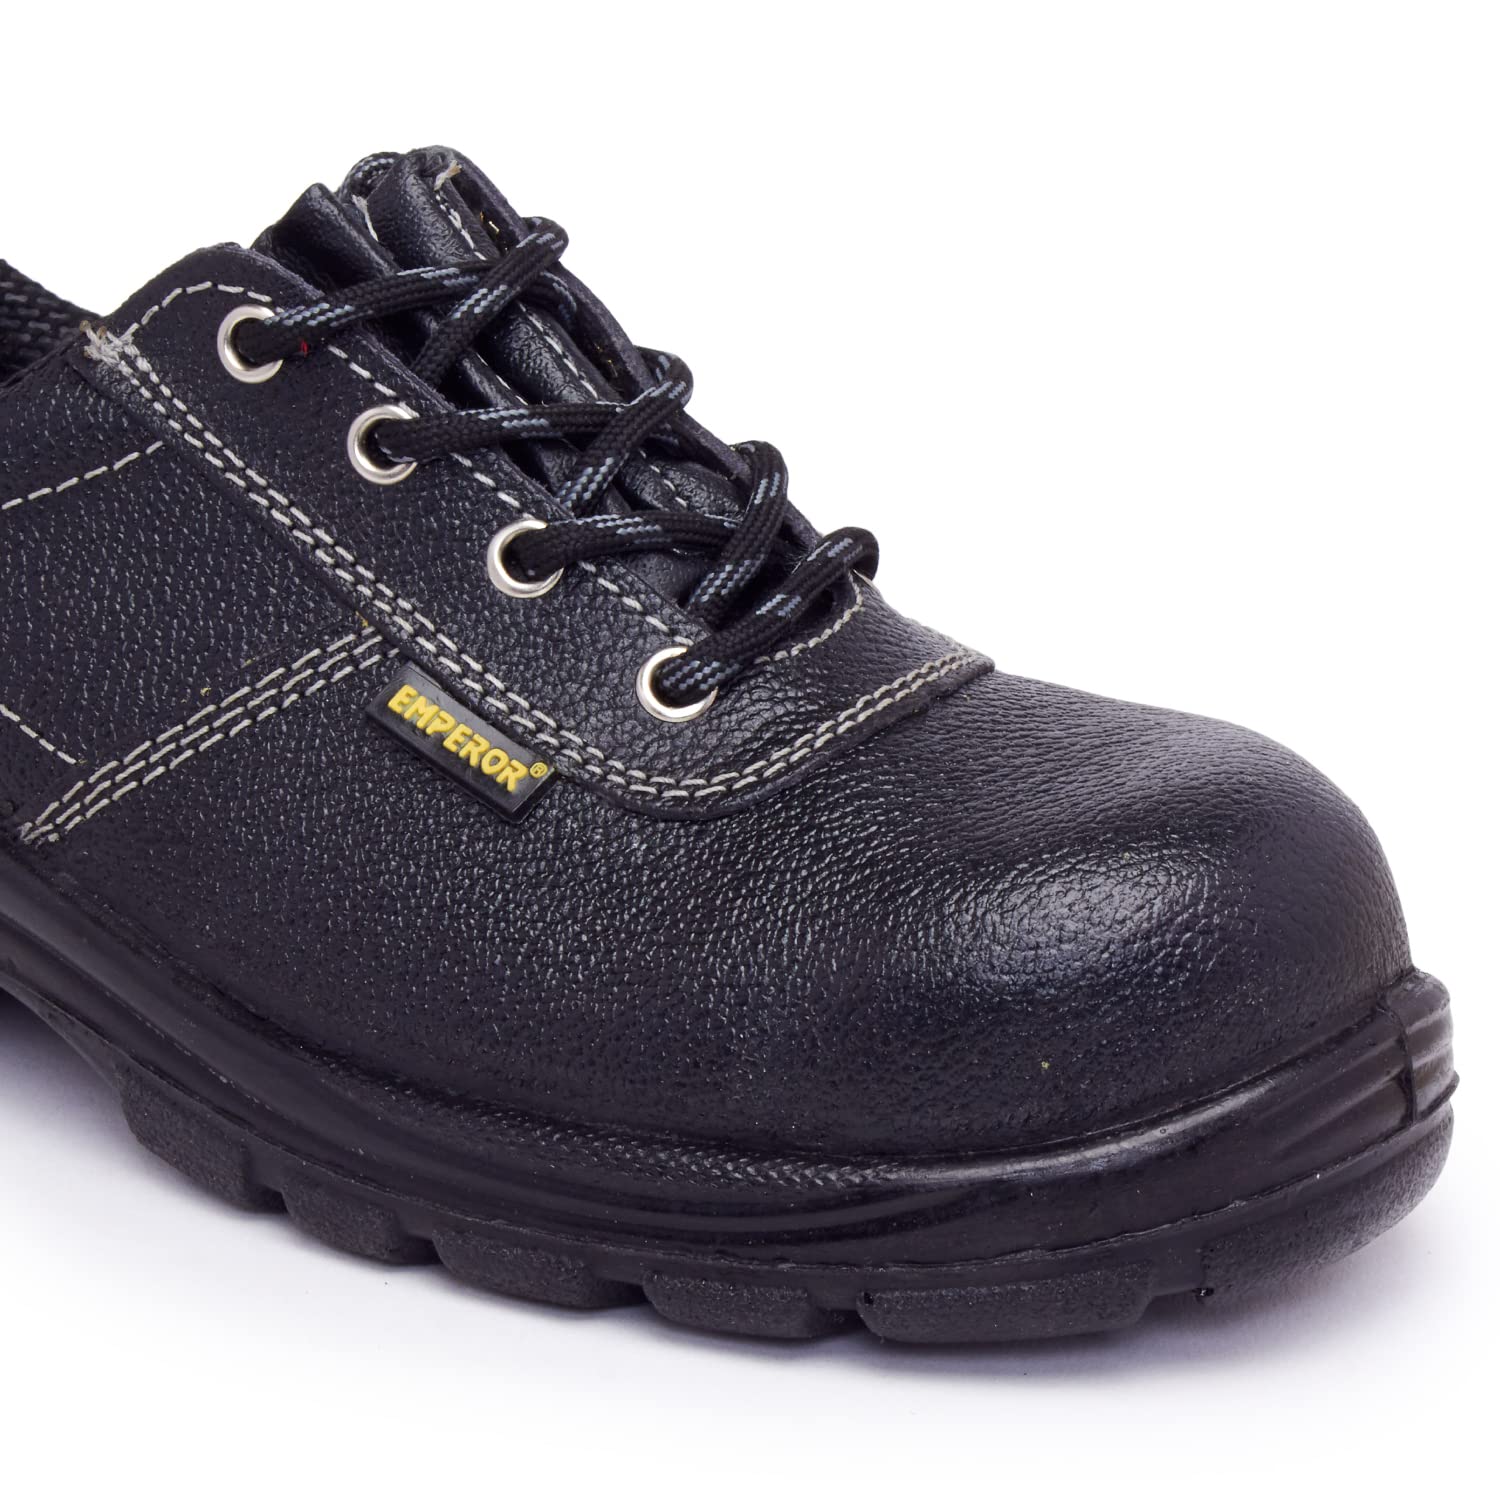 Emperor Steel Toe Leather Safety Shoe ELECTRICAL